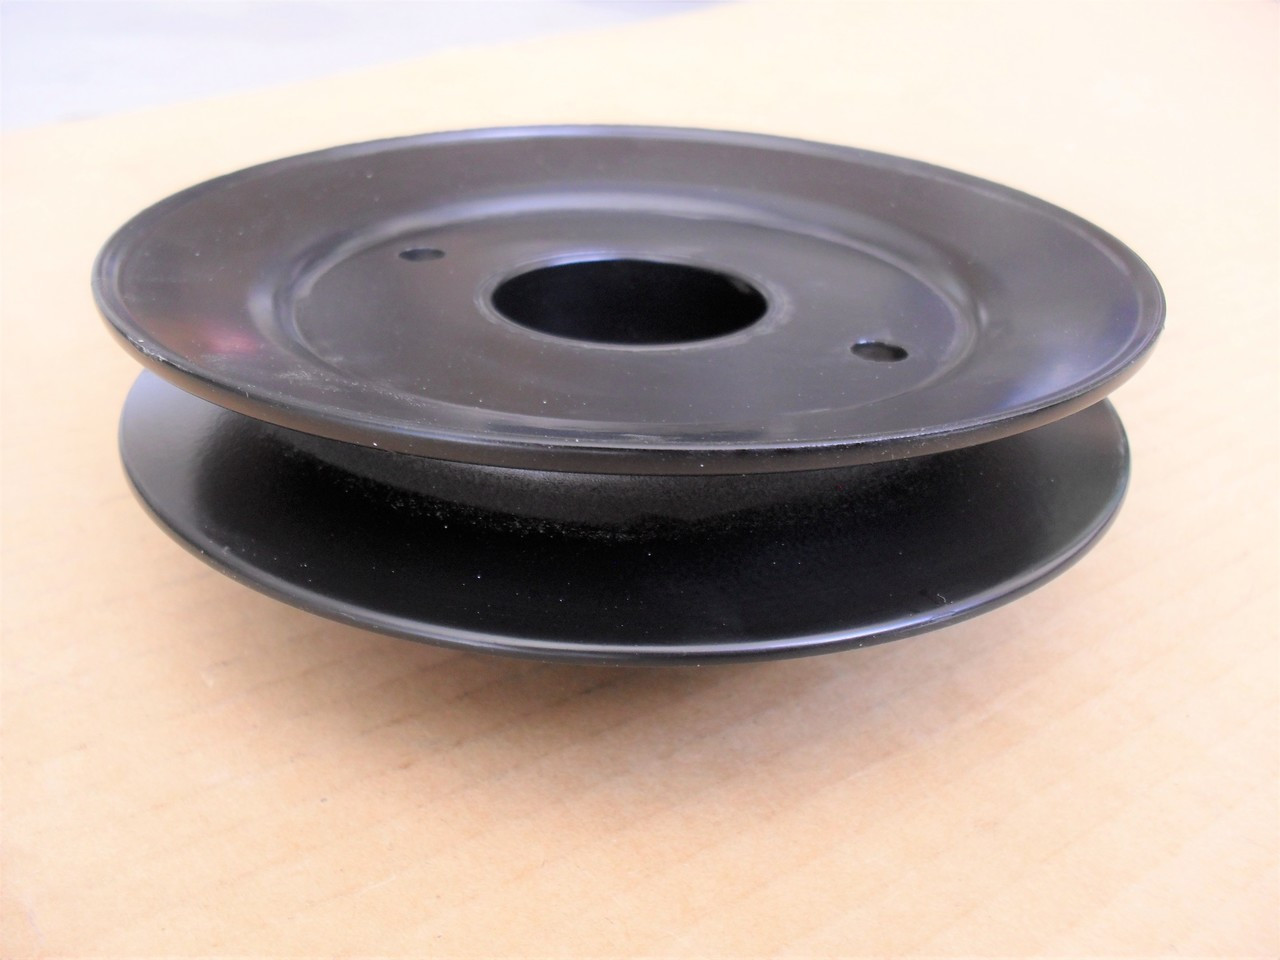 Deck Spindle Pulley for Ariens 07329667 ID: 1 " Splined OD: 5-5/8 "